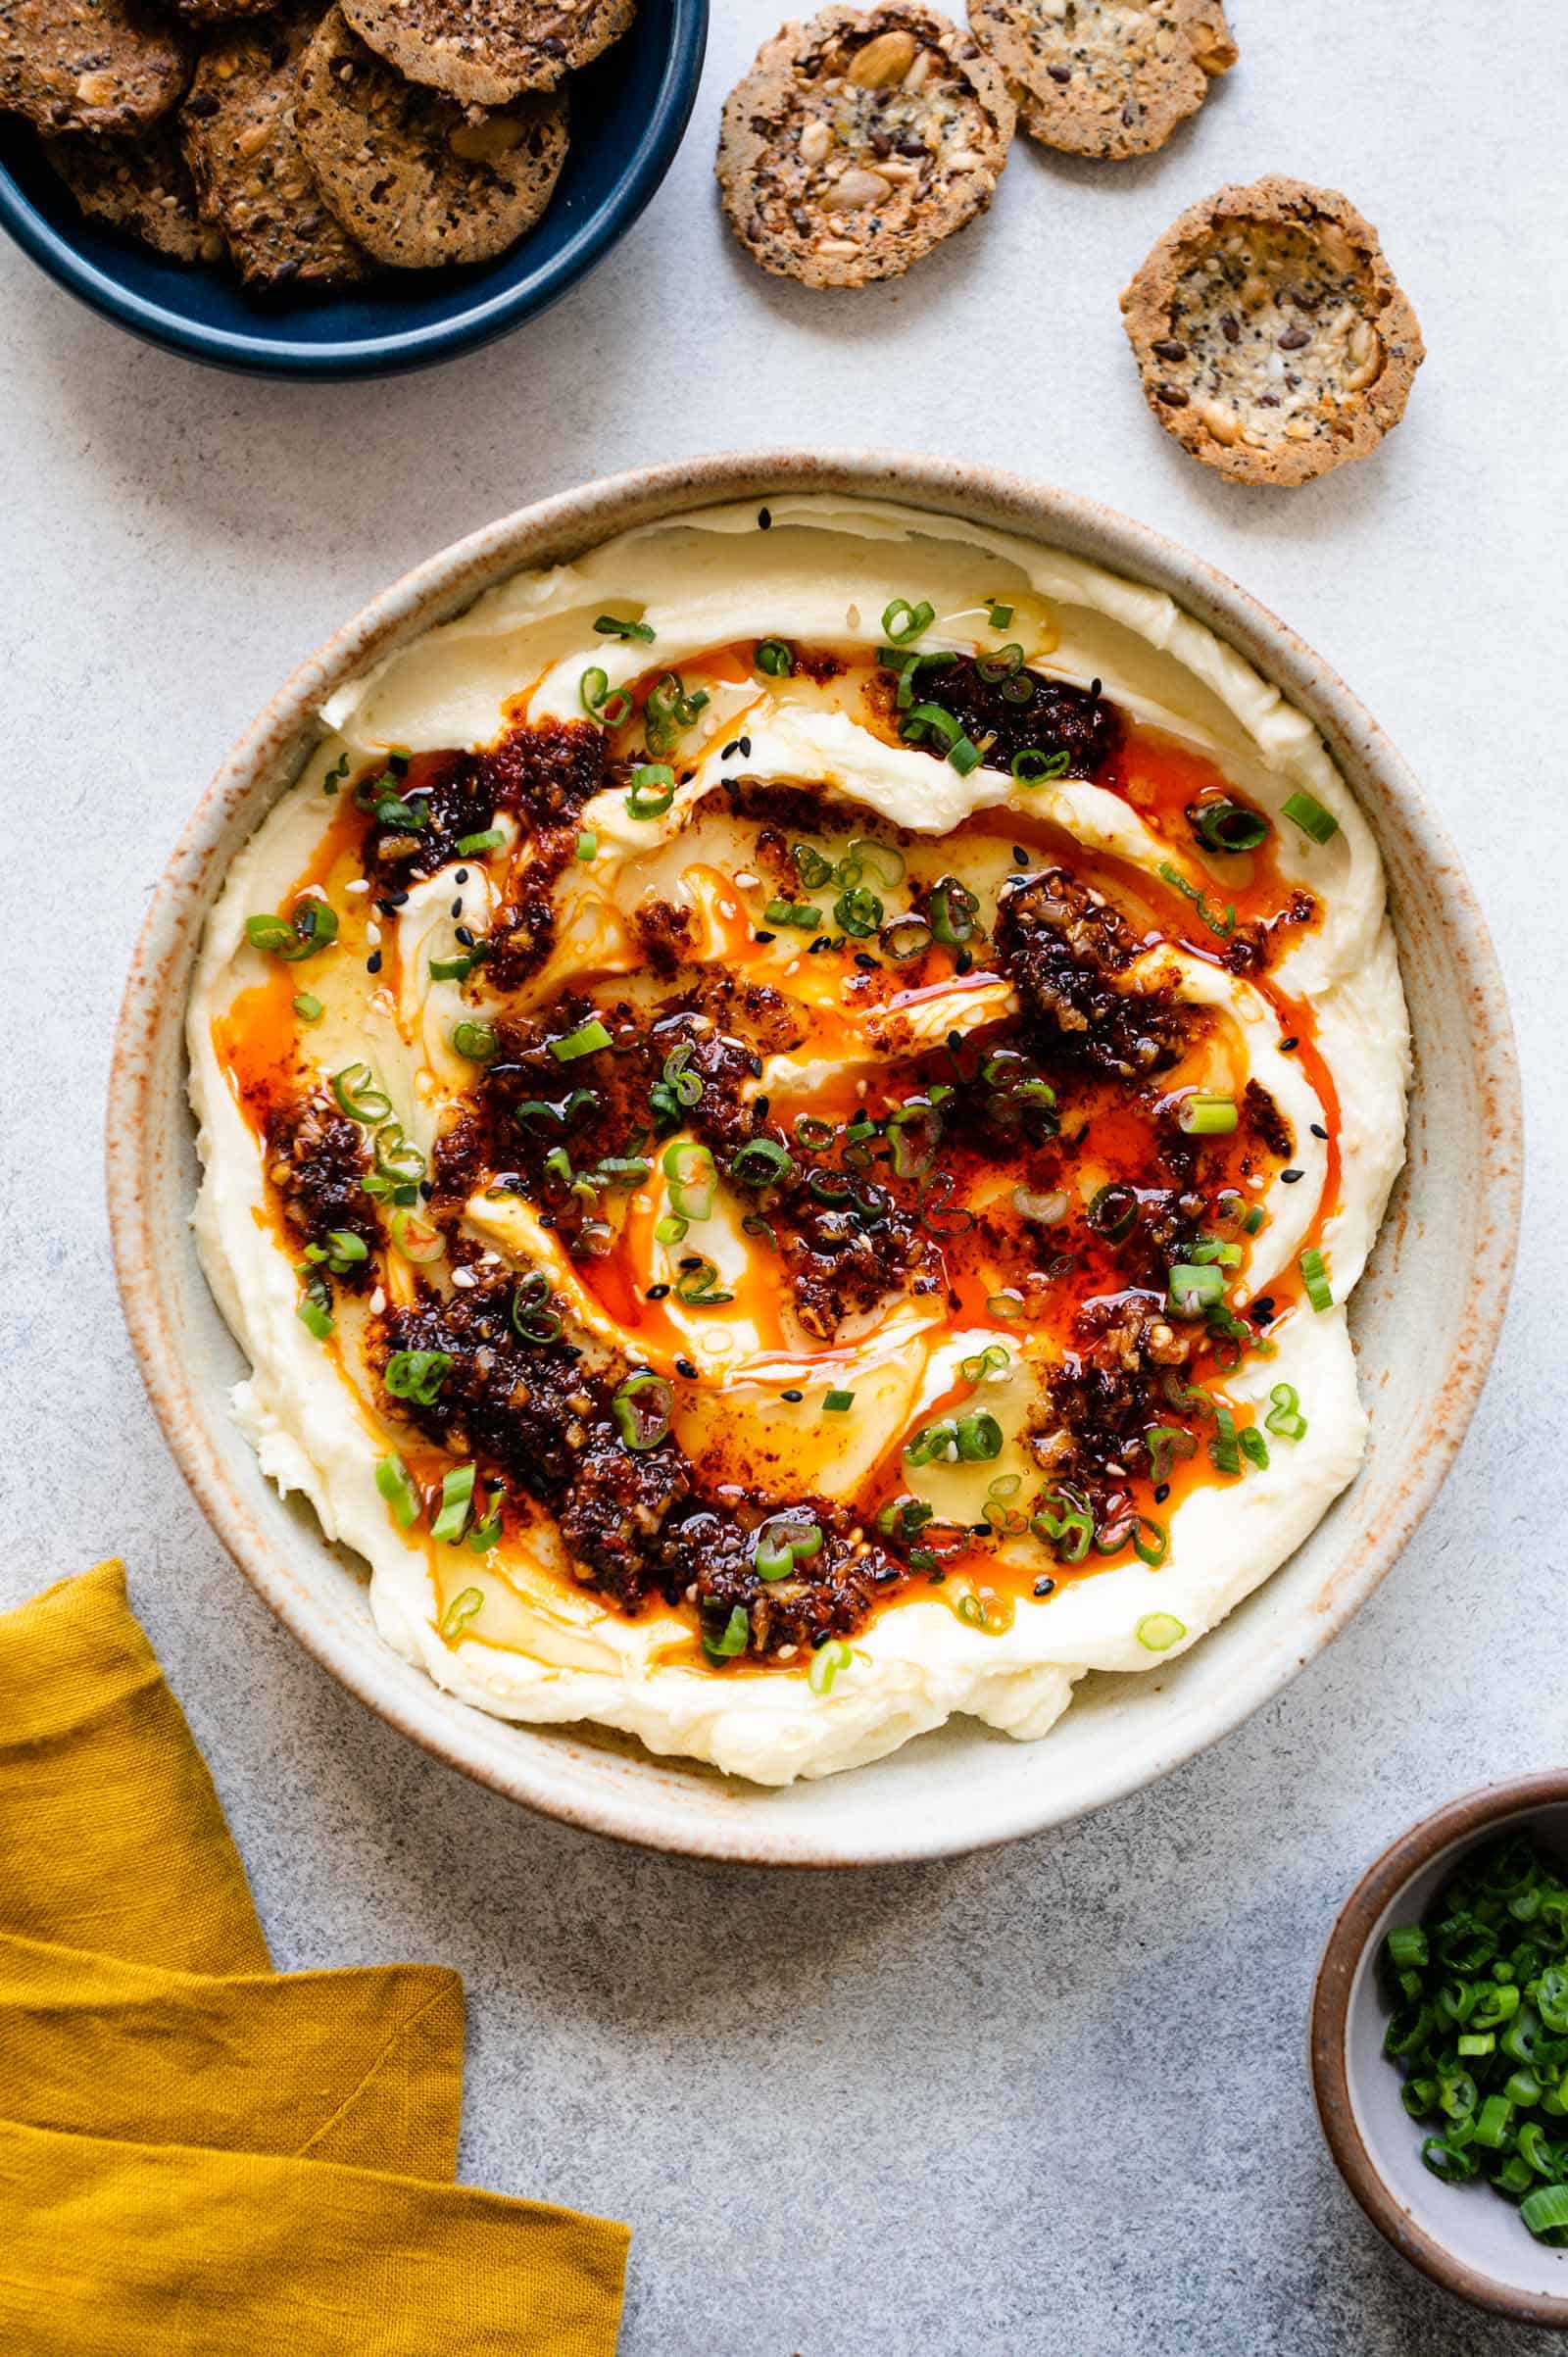 Whipped Brie with Honey & Chili Oil